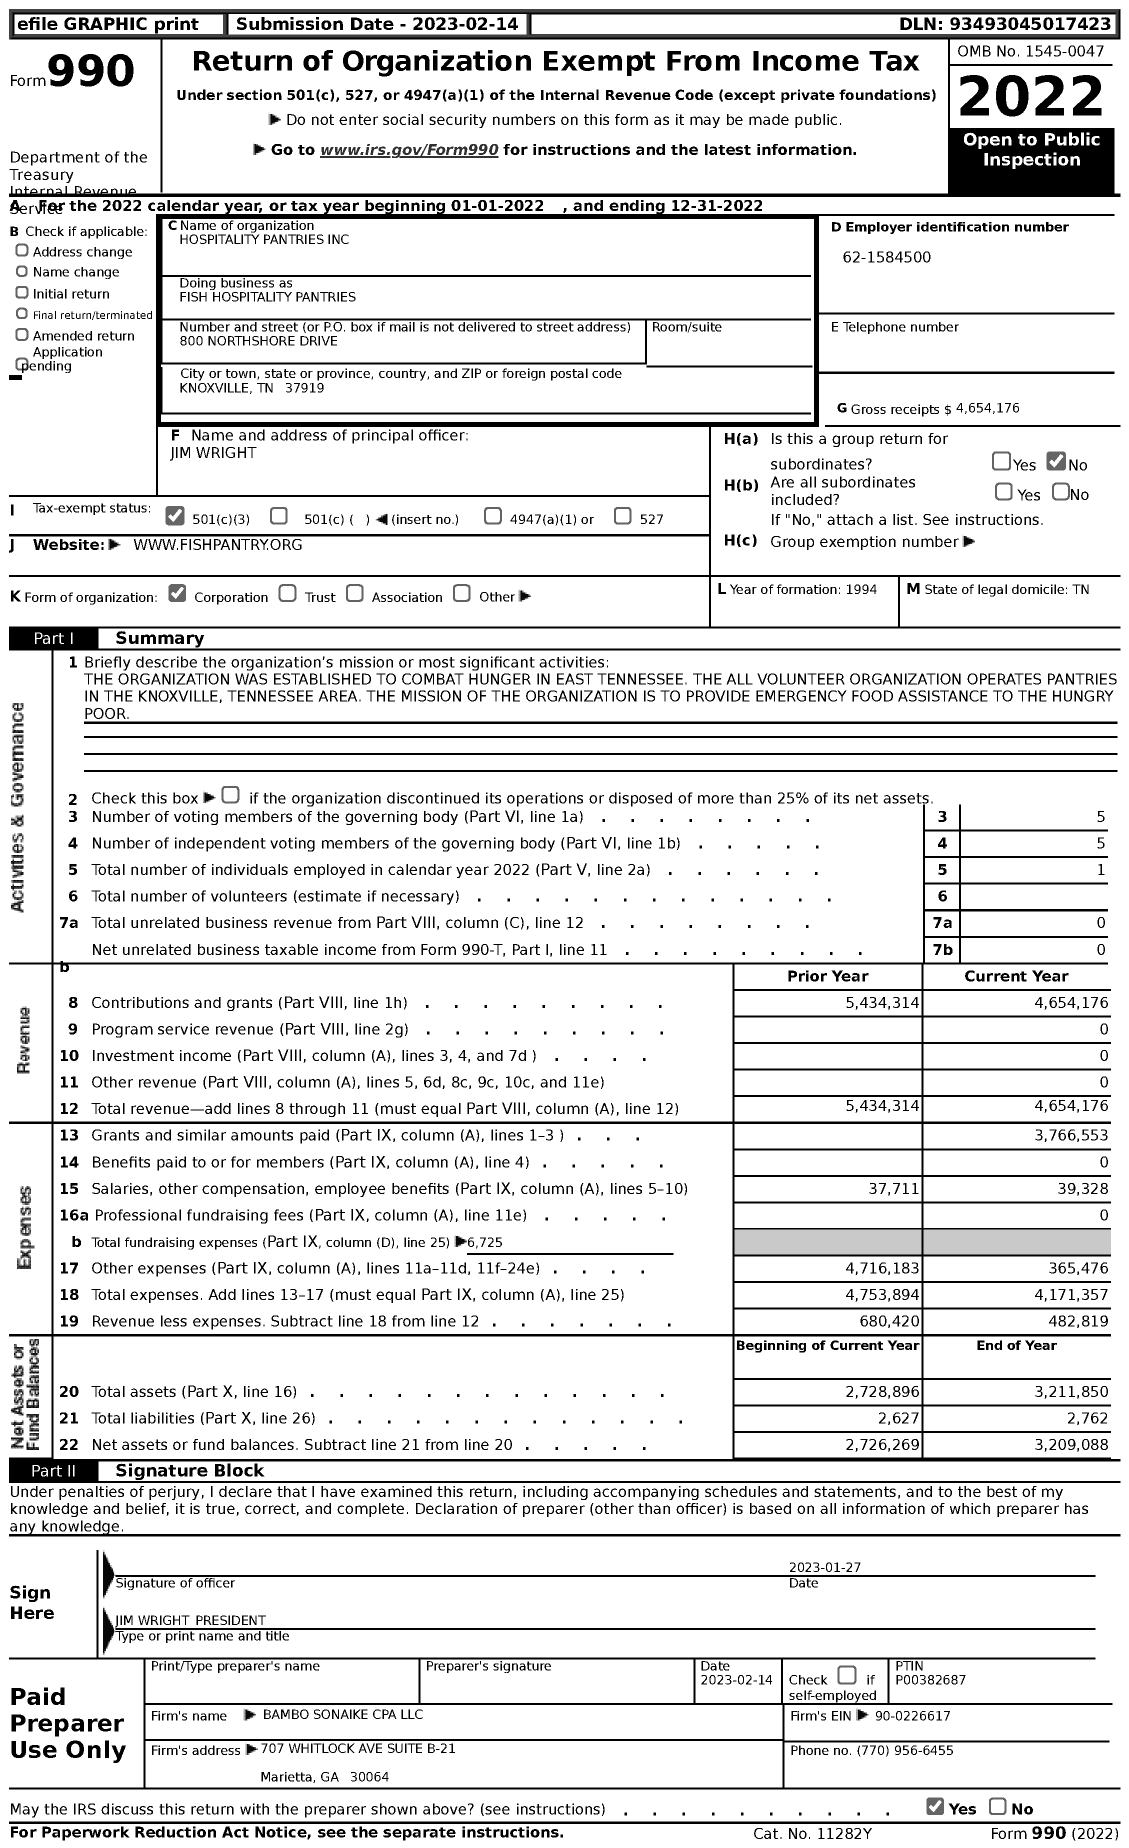 Image of first page of 2022 Form 990 for Fish Hospitality Pantries